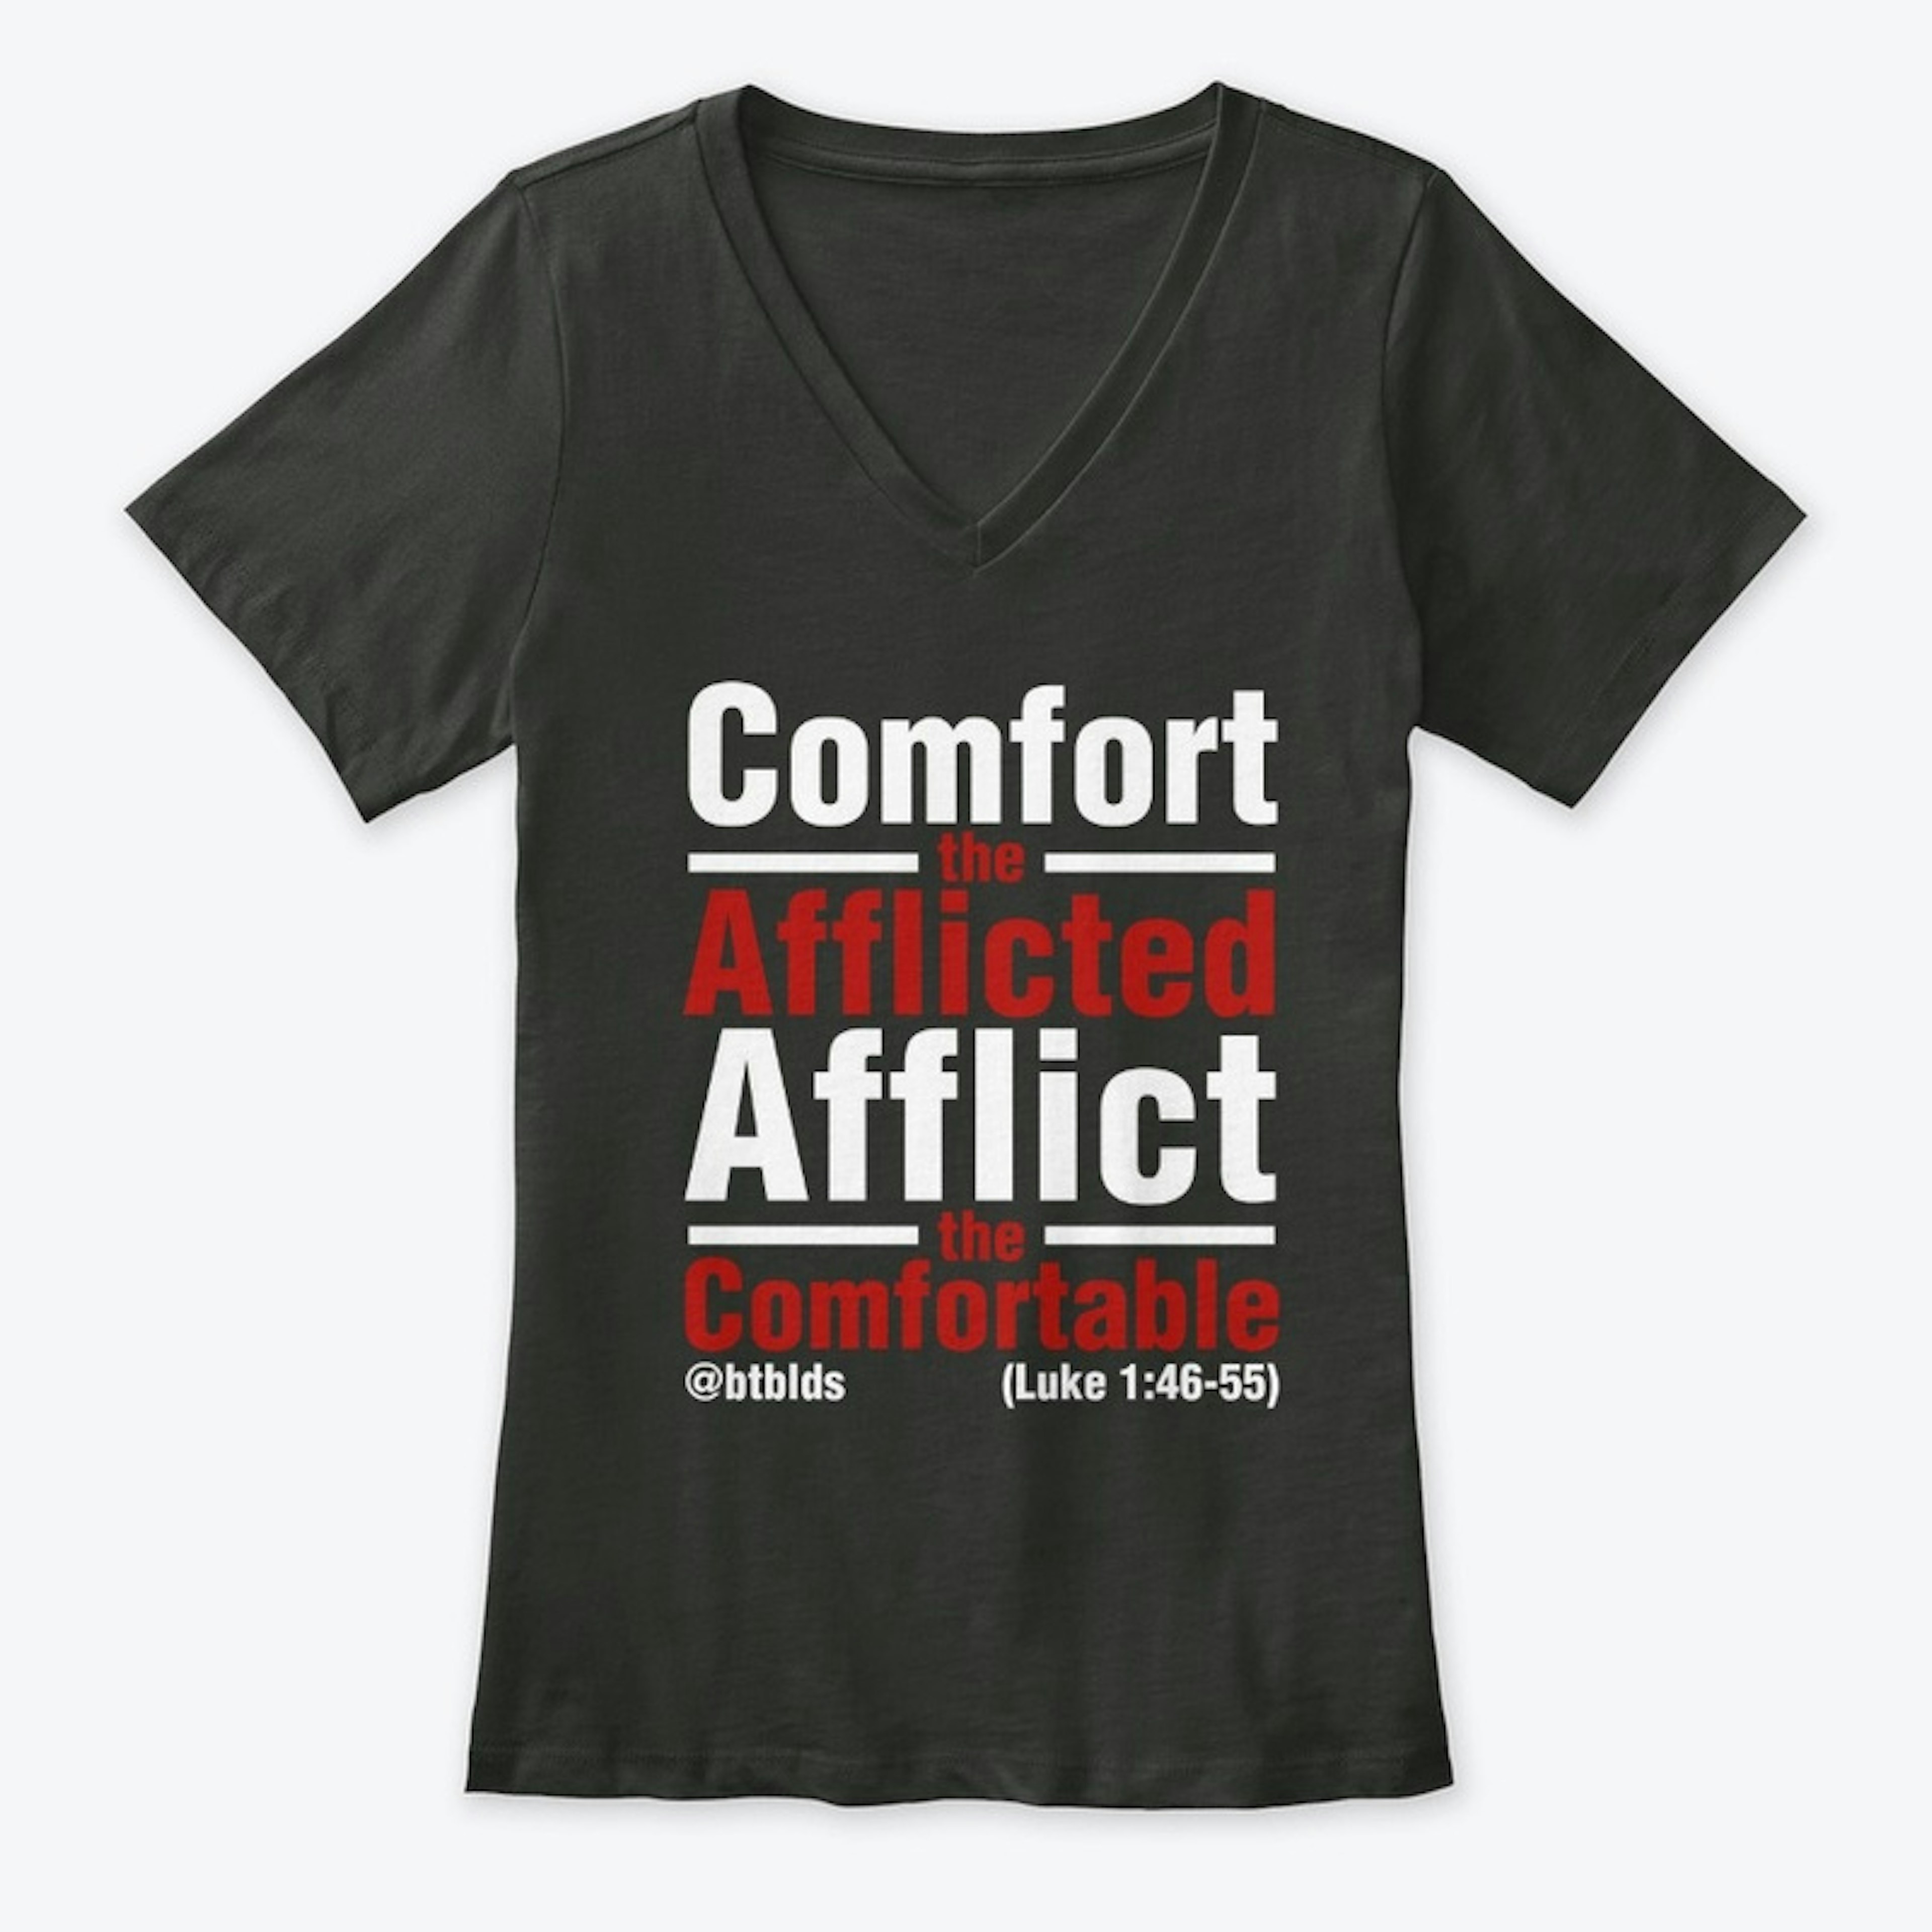 Comfort the Afflicted